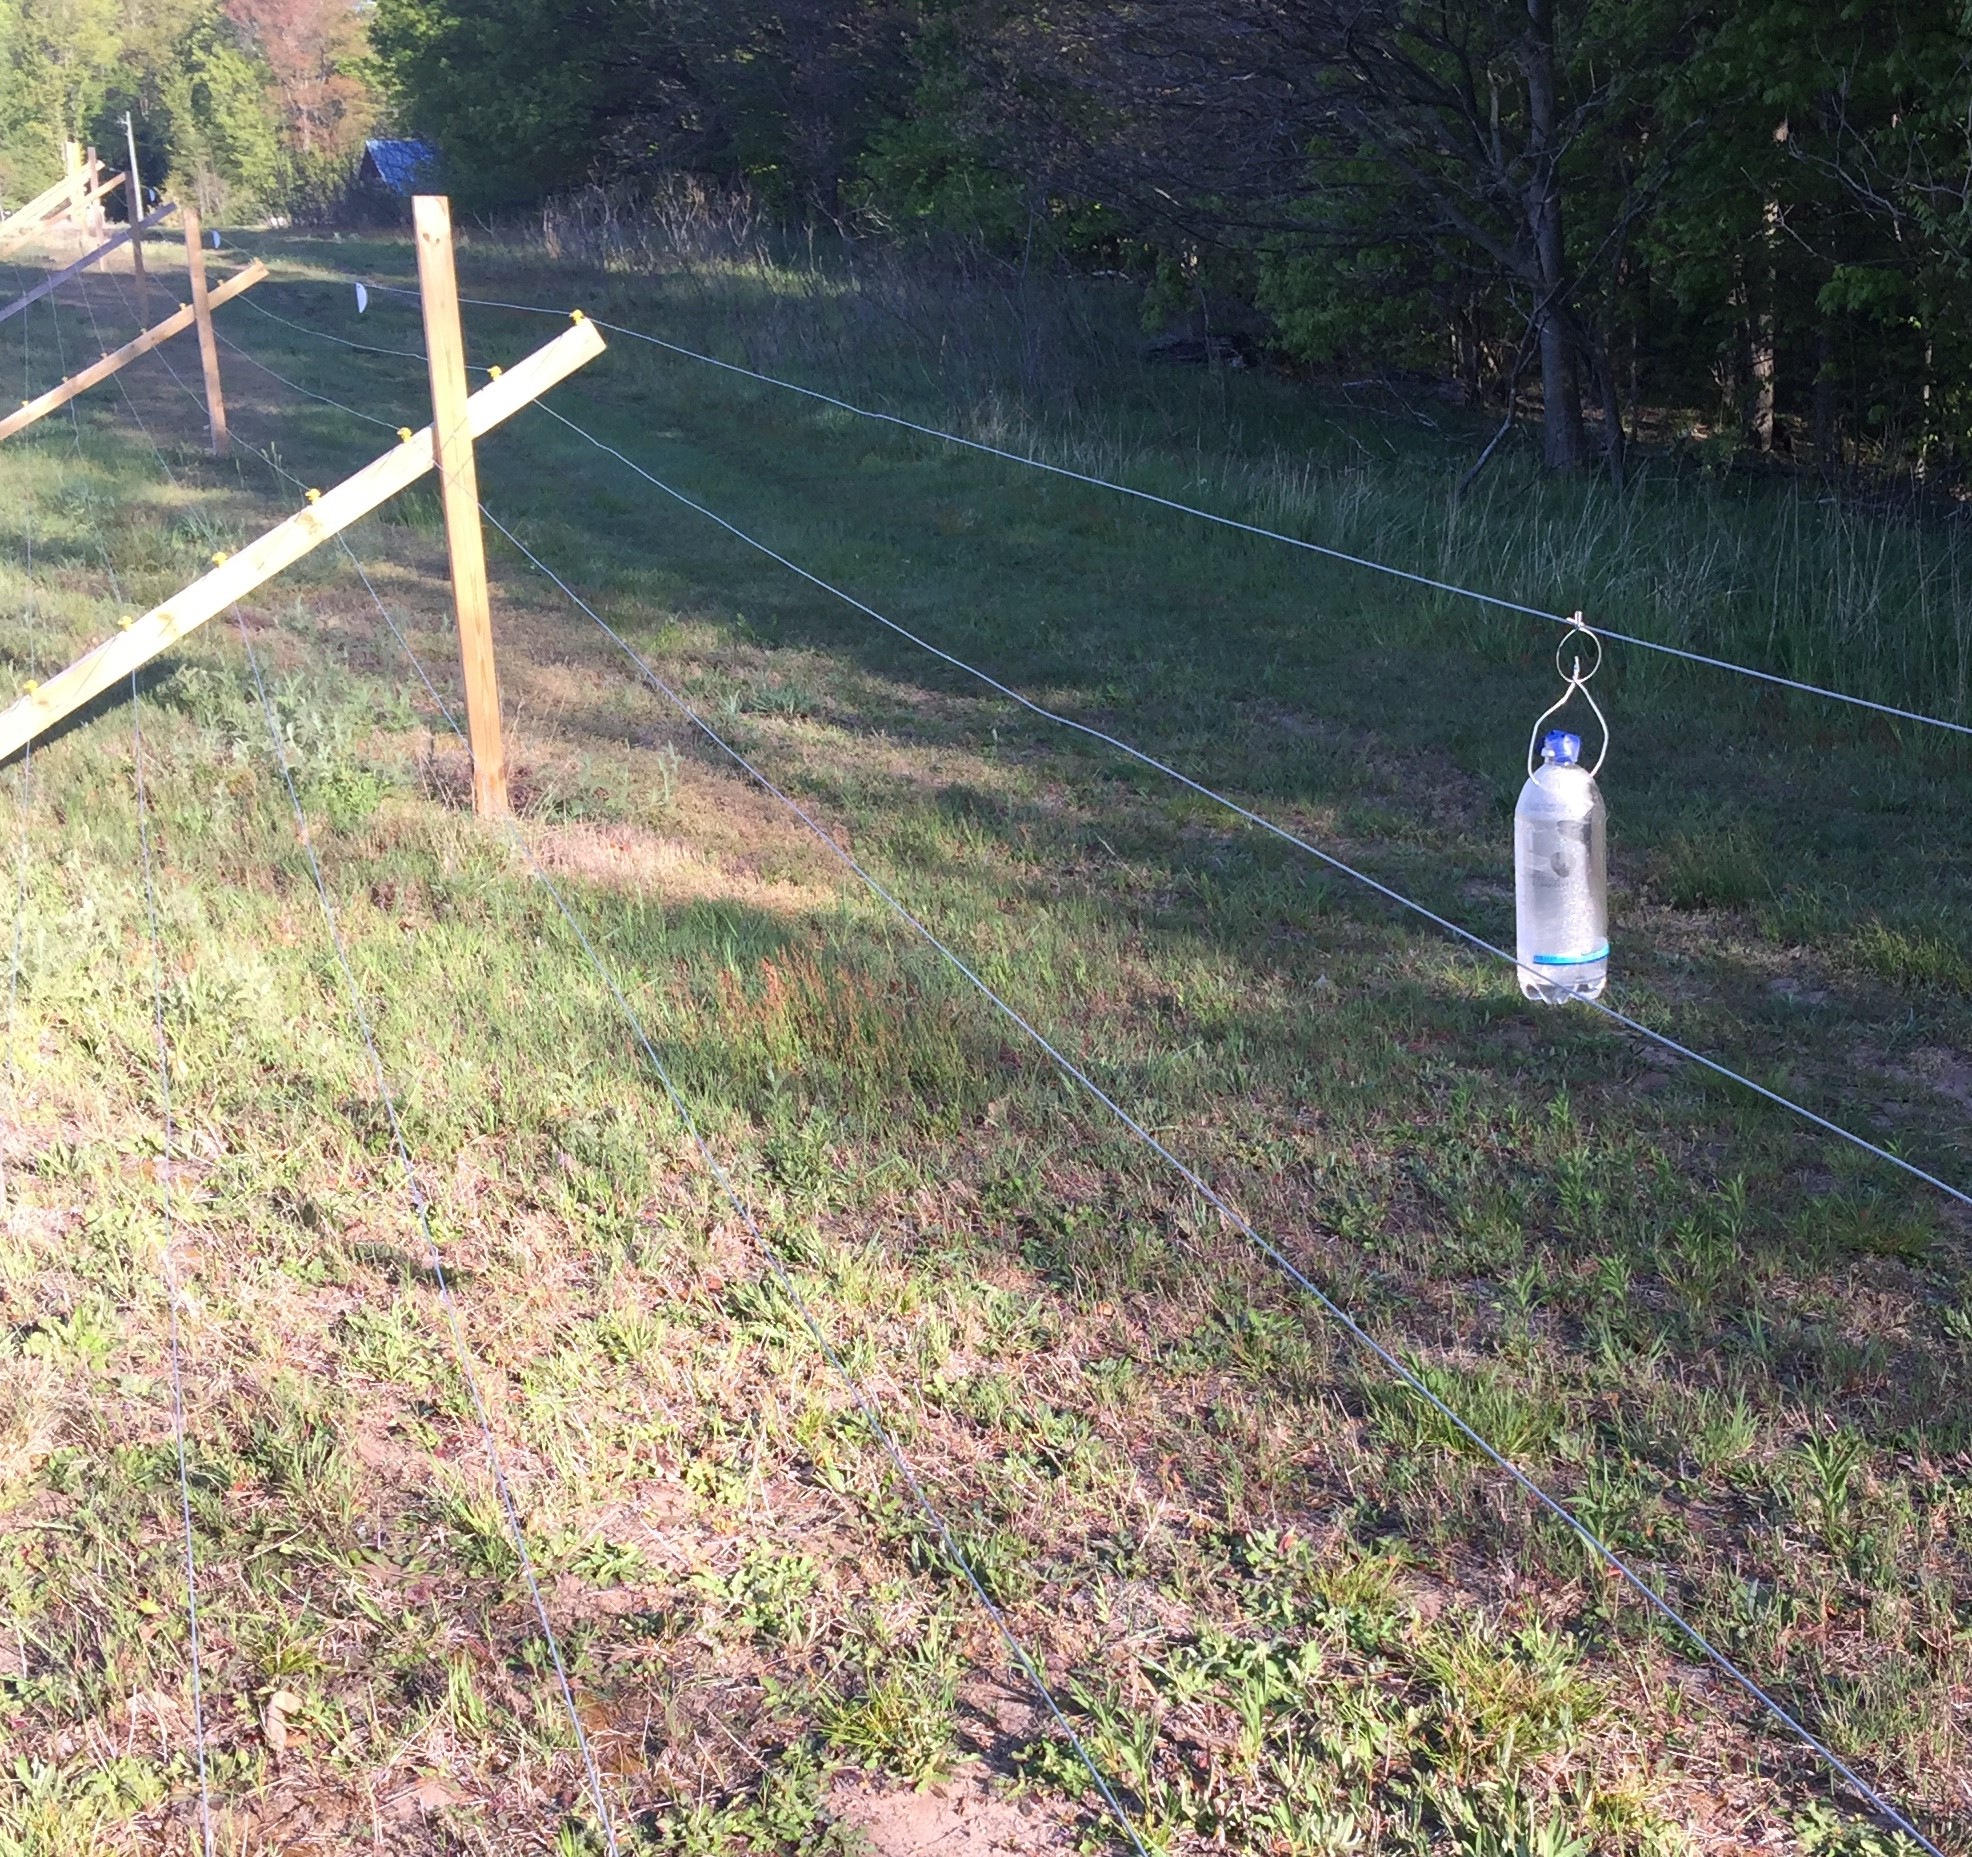 Plastic bottle filled with vodka hanging from a wire fence.